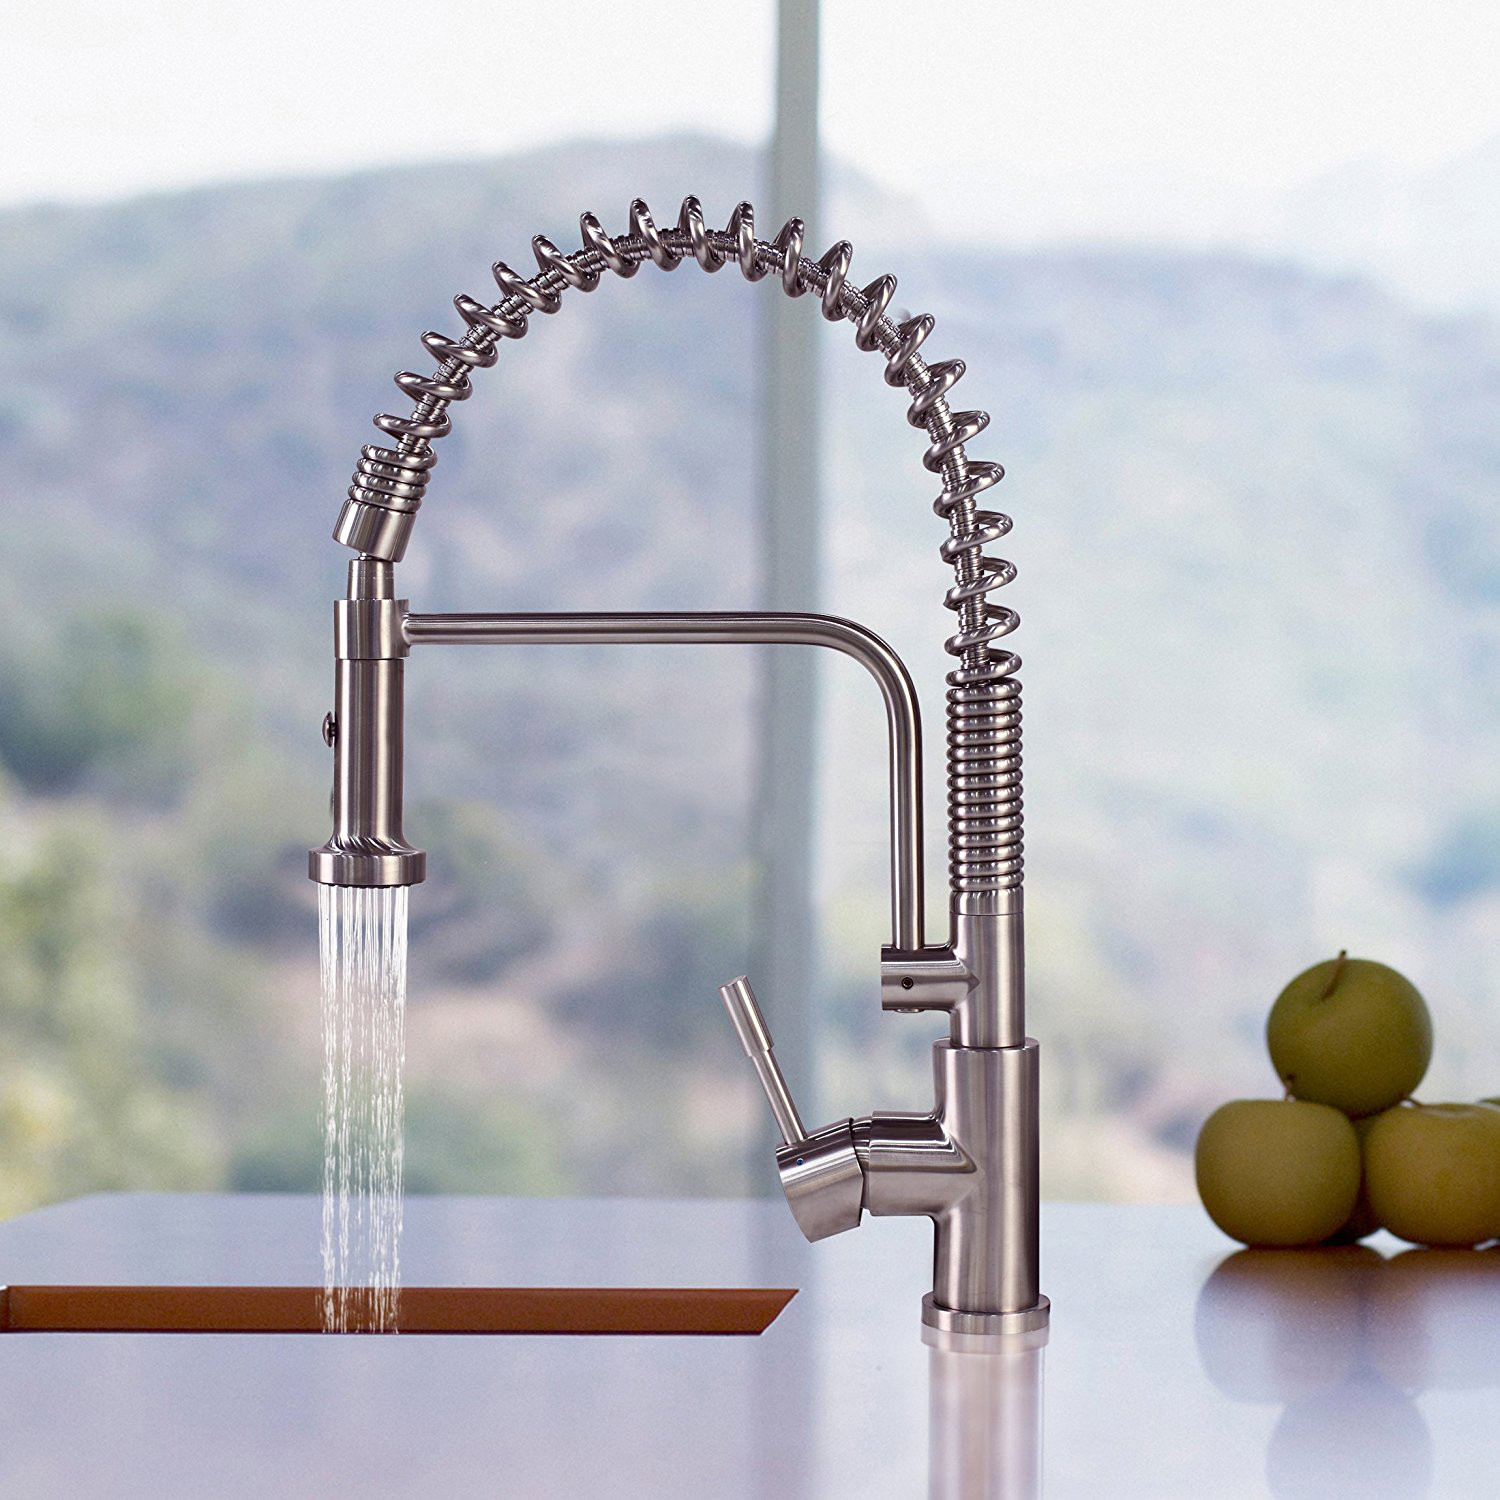 Small Kitchen Faucet
 10 Best mercial Kitchen Faucets Reviews & Guide 2020